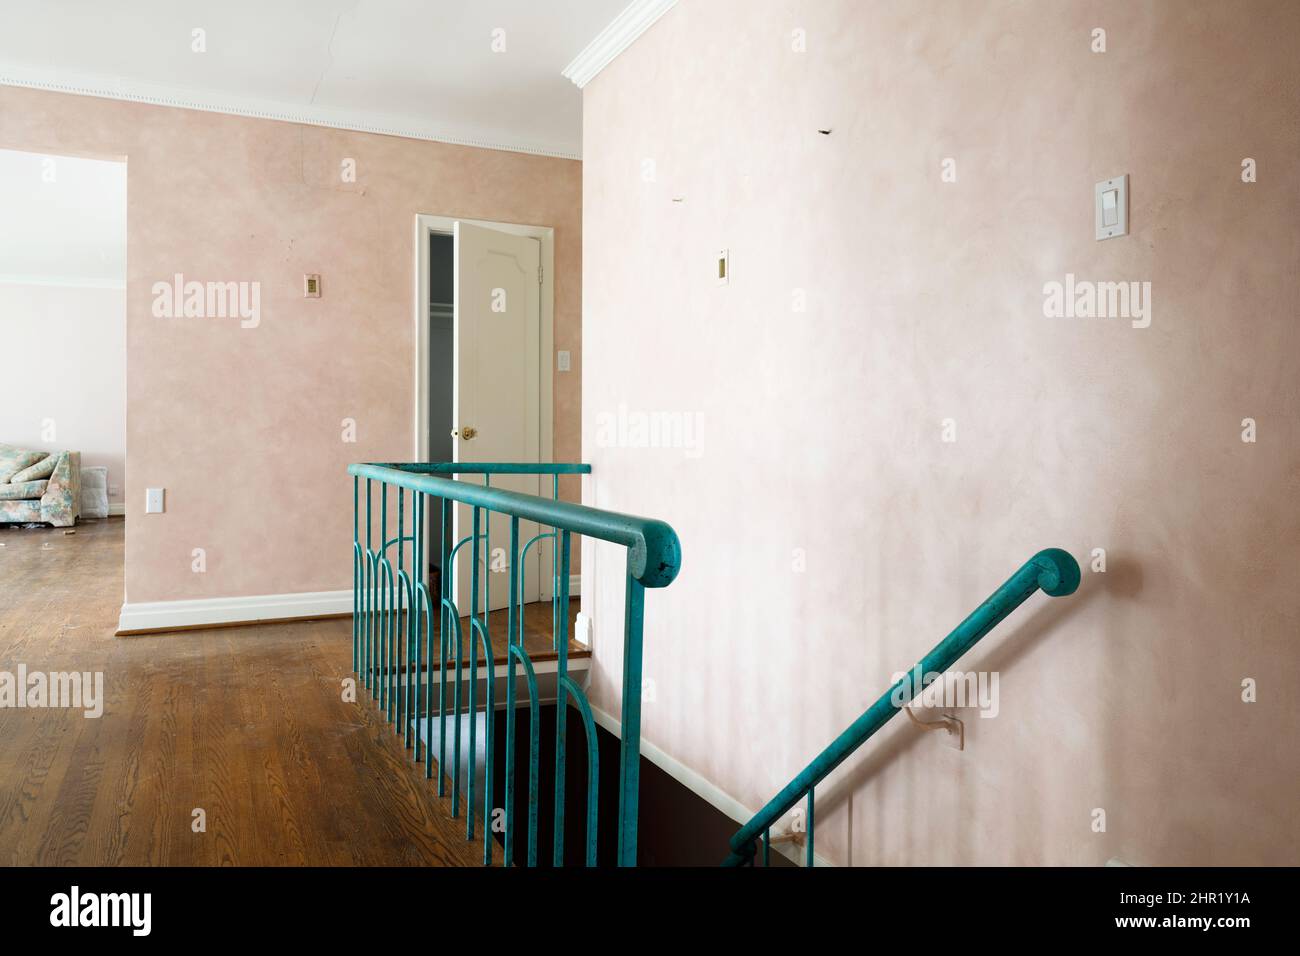 A wooden staircase railing with decorative metal spindles painted turquoise in a mid century build home.  This house has been demolished. Stock Photo